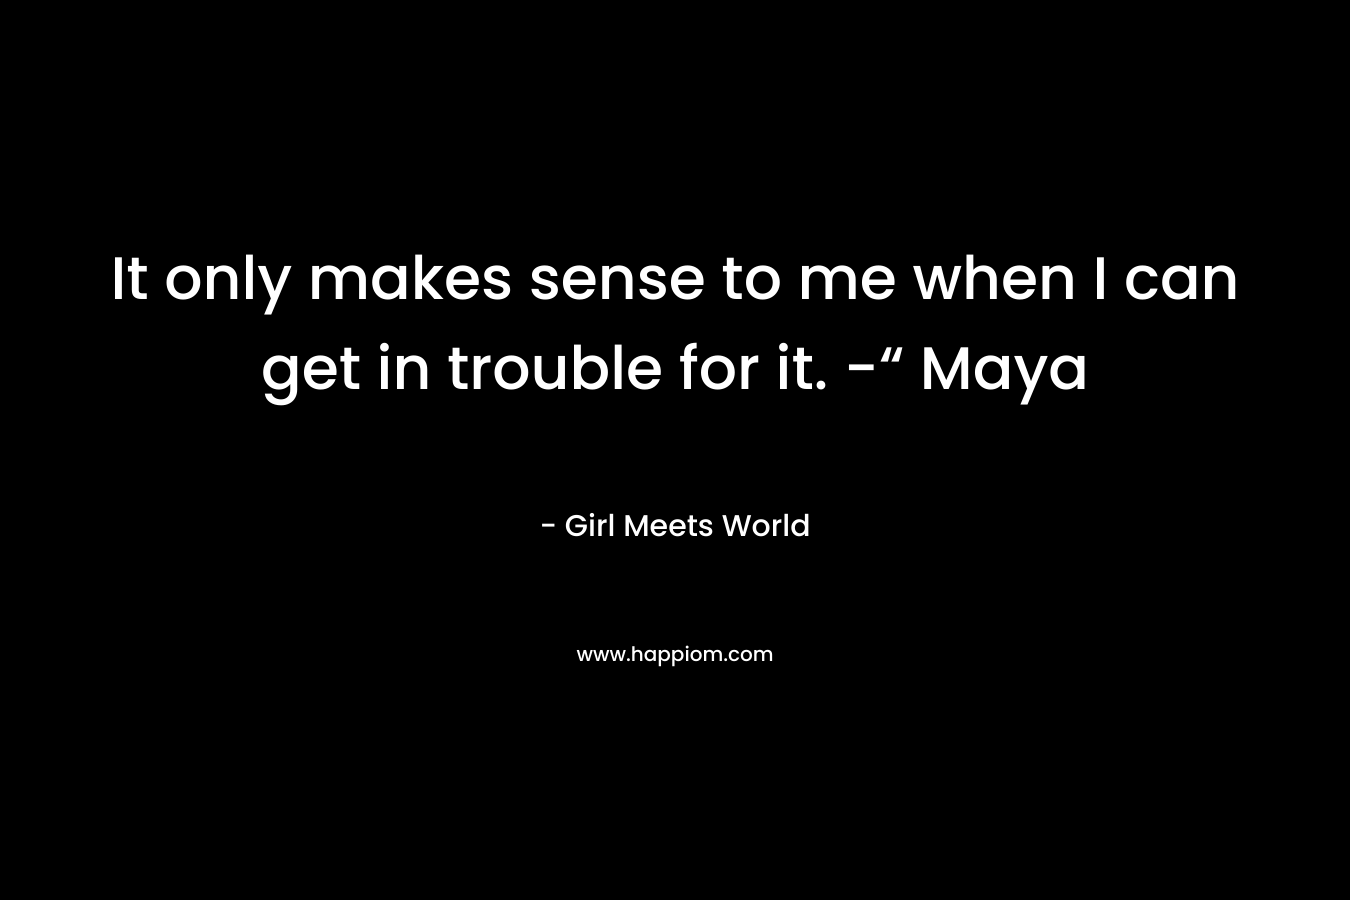 It only makes sense to me when I can get in trouble for it. -“ Maya